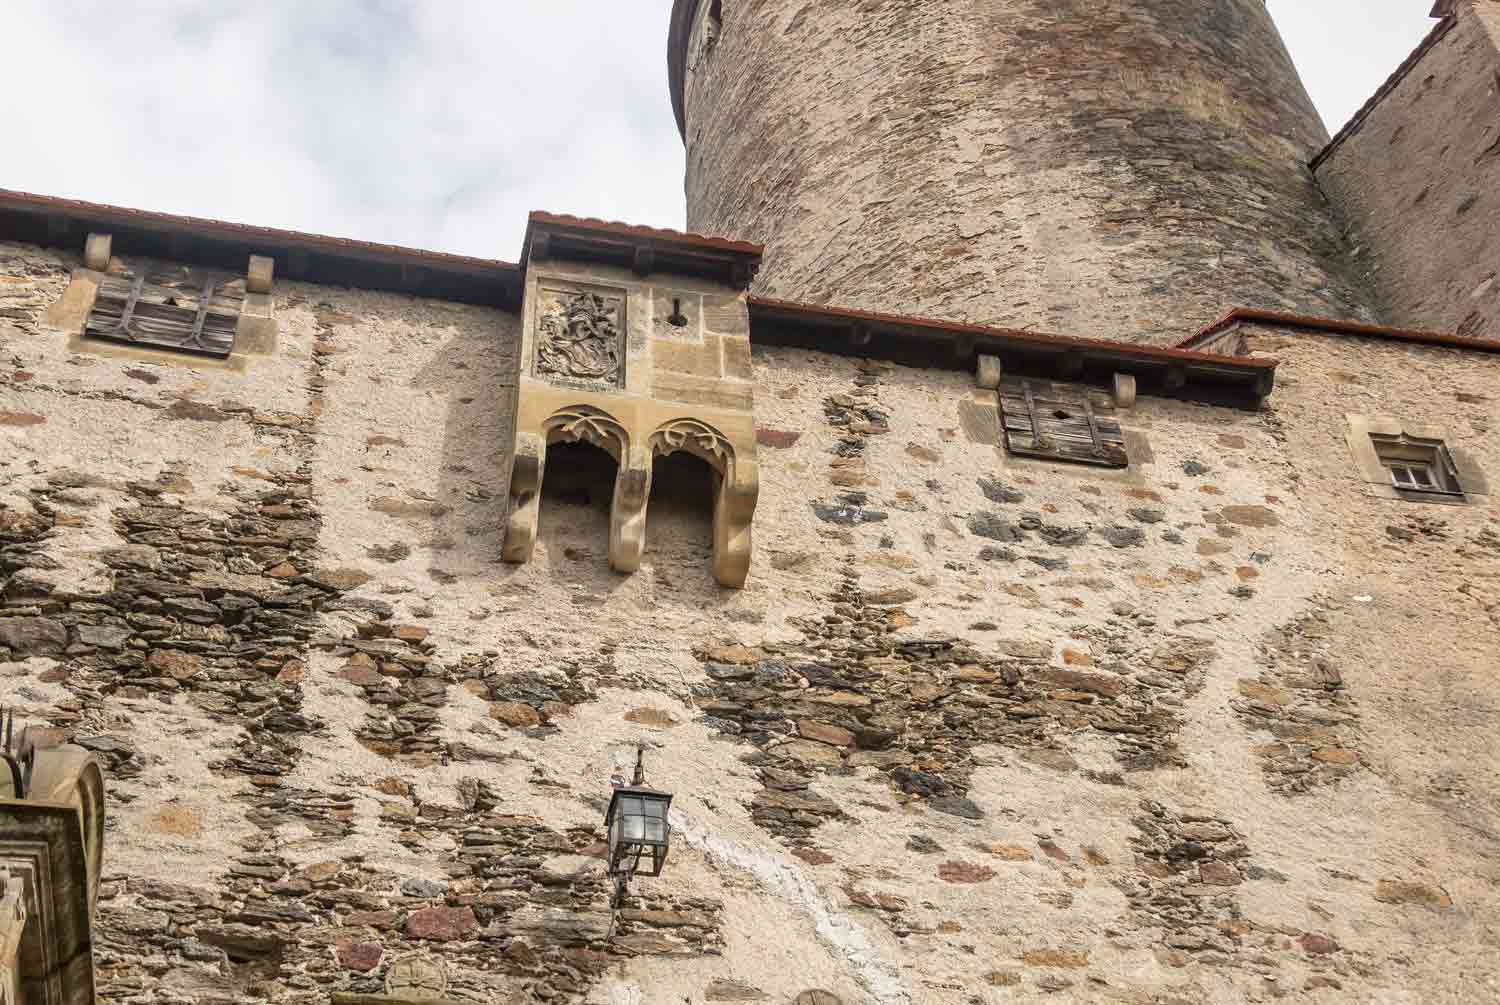 A latrine structure is built on the side of a castle wall.